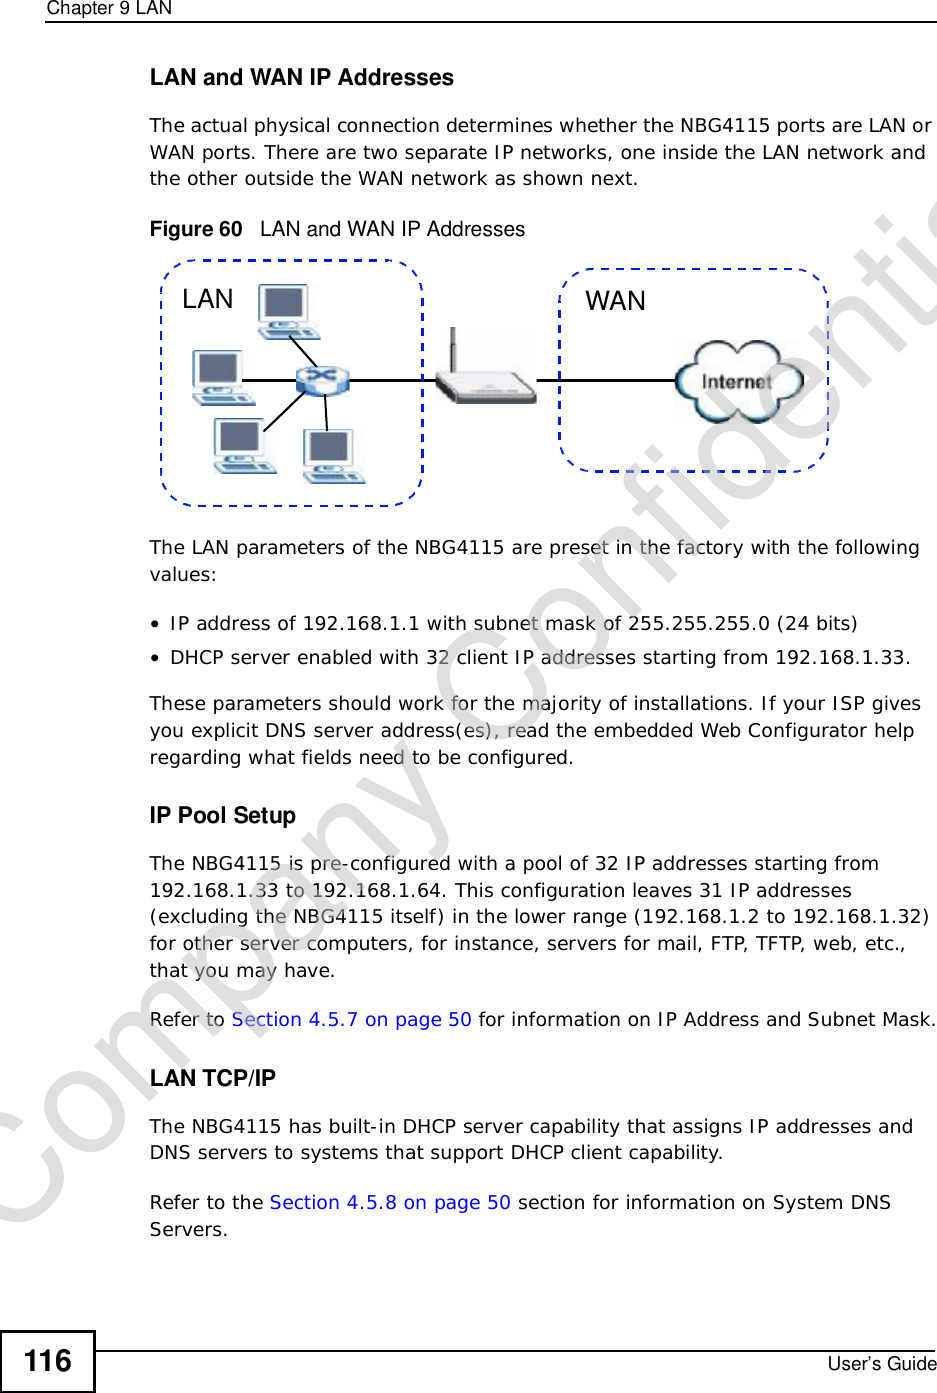 Chapter 9LANUser’s Guide116LAN and WAN IP AddressesThe actual physical connection determines whether the NBG4115 ports are LAN or WAN ports. There are two separate IP networks, one inside the LAN network and the other outside the WAN network as shown next.Figure 60   LAN and WAN IP AddressesThe LAN parameters of the NBG4115 are preset in the factory with the following values:•IP address of 192.168.1.1 with subnet mask of 255.255.255.0 (24 bits)•DHCP server enabled with 32 client IP addresses starting from 192.168.1.33. These parameters should work for the majority of installations. If your ISP gives you explicit DNS server address(es), read the embedded Web Configurator help regarding what fields need to be configured.IP Pool SetupThe NBG4115 is pre-configured with a pool of 32 IP addresses starting from 192.168.1.33 to 192.168.1.64. This configuration leaves 31 IP addresses (excluding the NBG4115 itself) in the lower range (192.168.1.2 to 192.168.1.32) for other server computers, for instance, servers for mail, FTP, TFTP, web, etc., that you may have.Refer to Section 4.5.7 on page 50 for information on IP Address and Subnet Mask.LAN TCP/IP The NBG4115 has built-in DHCP server capability that assigns IP addresses and DNS servers to systems that support DHCP client capability.Refer to the Section 4.5.8 on page 50 section for information on System DNS Servers.WANLANCompany Confidential